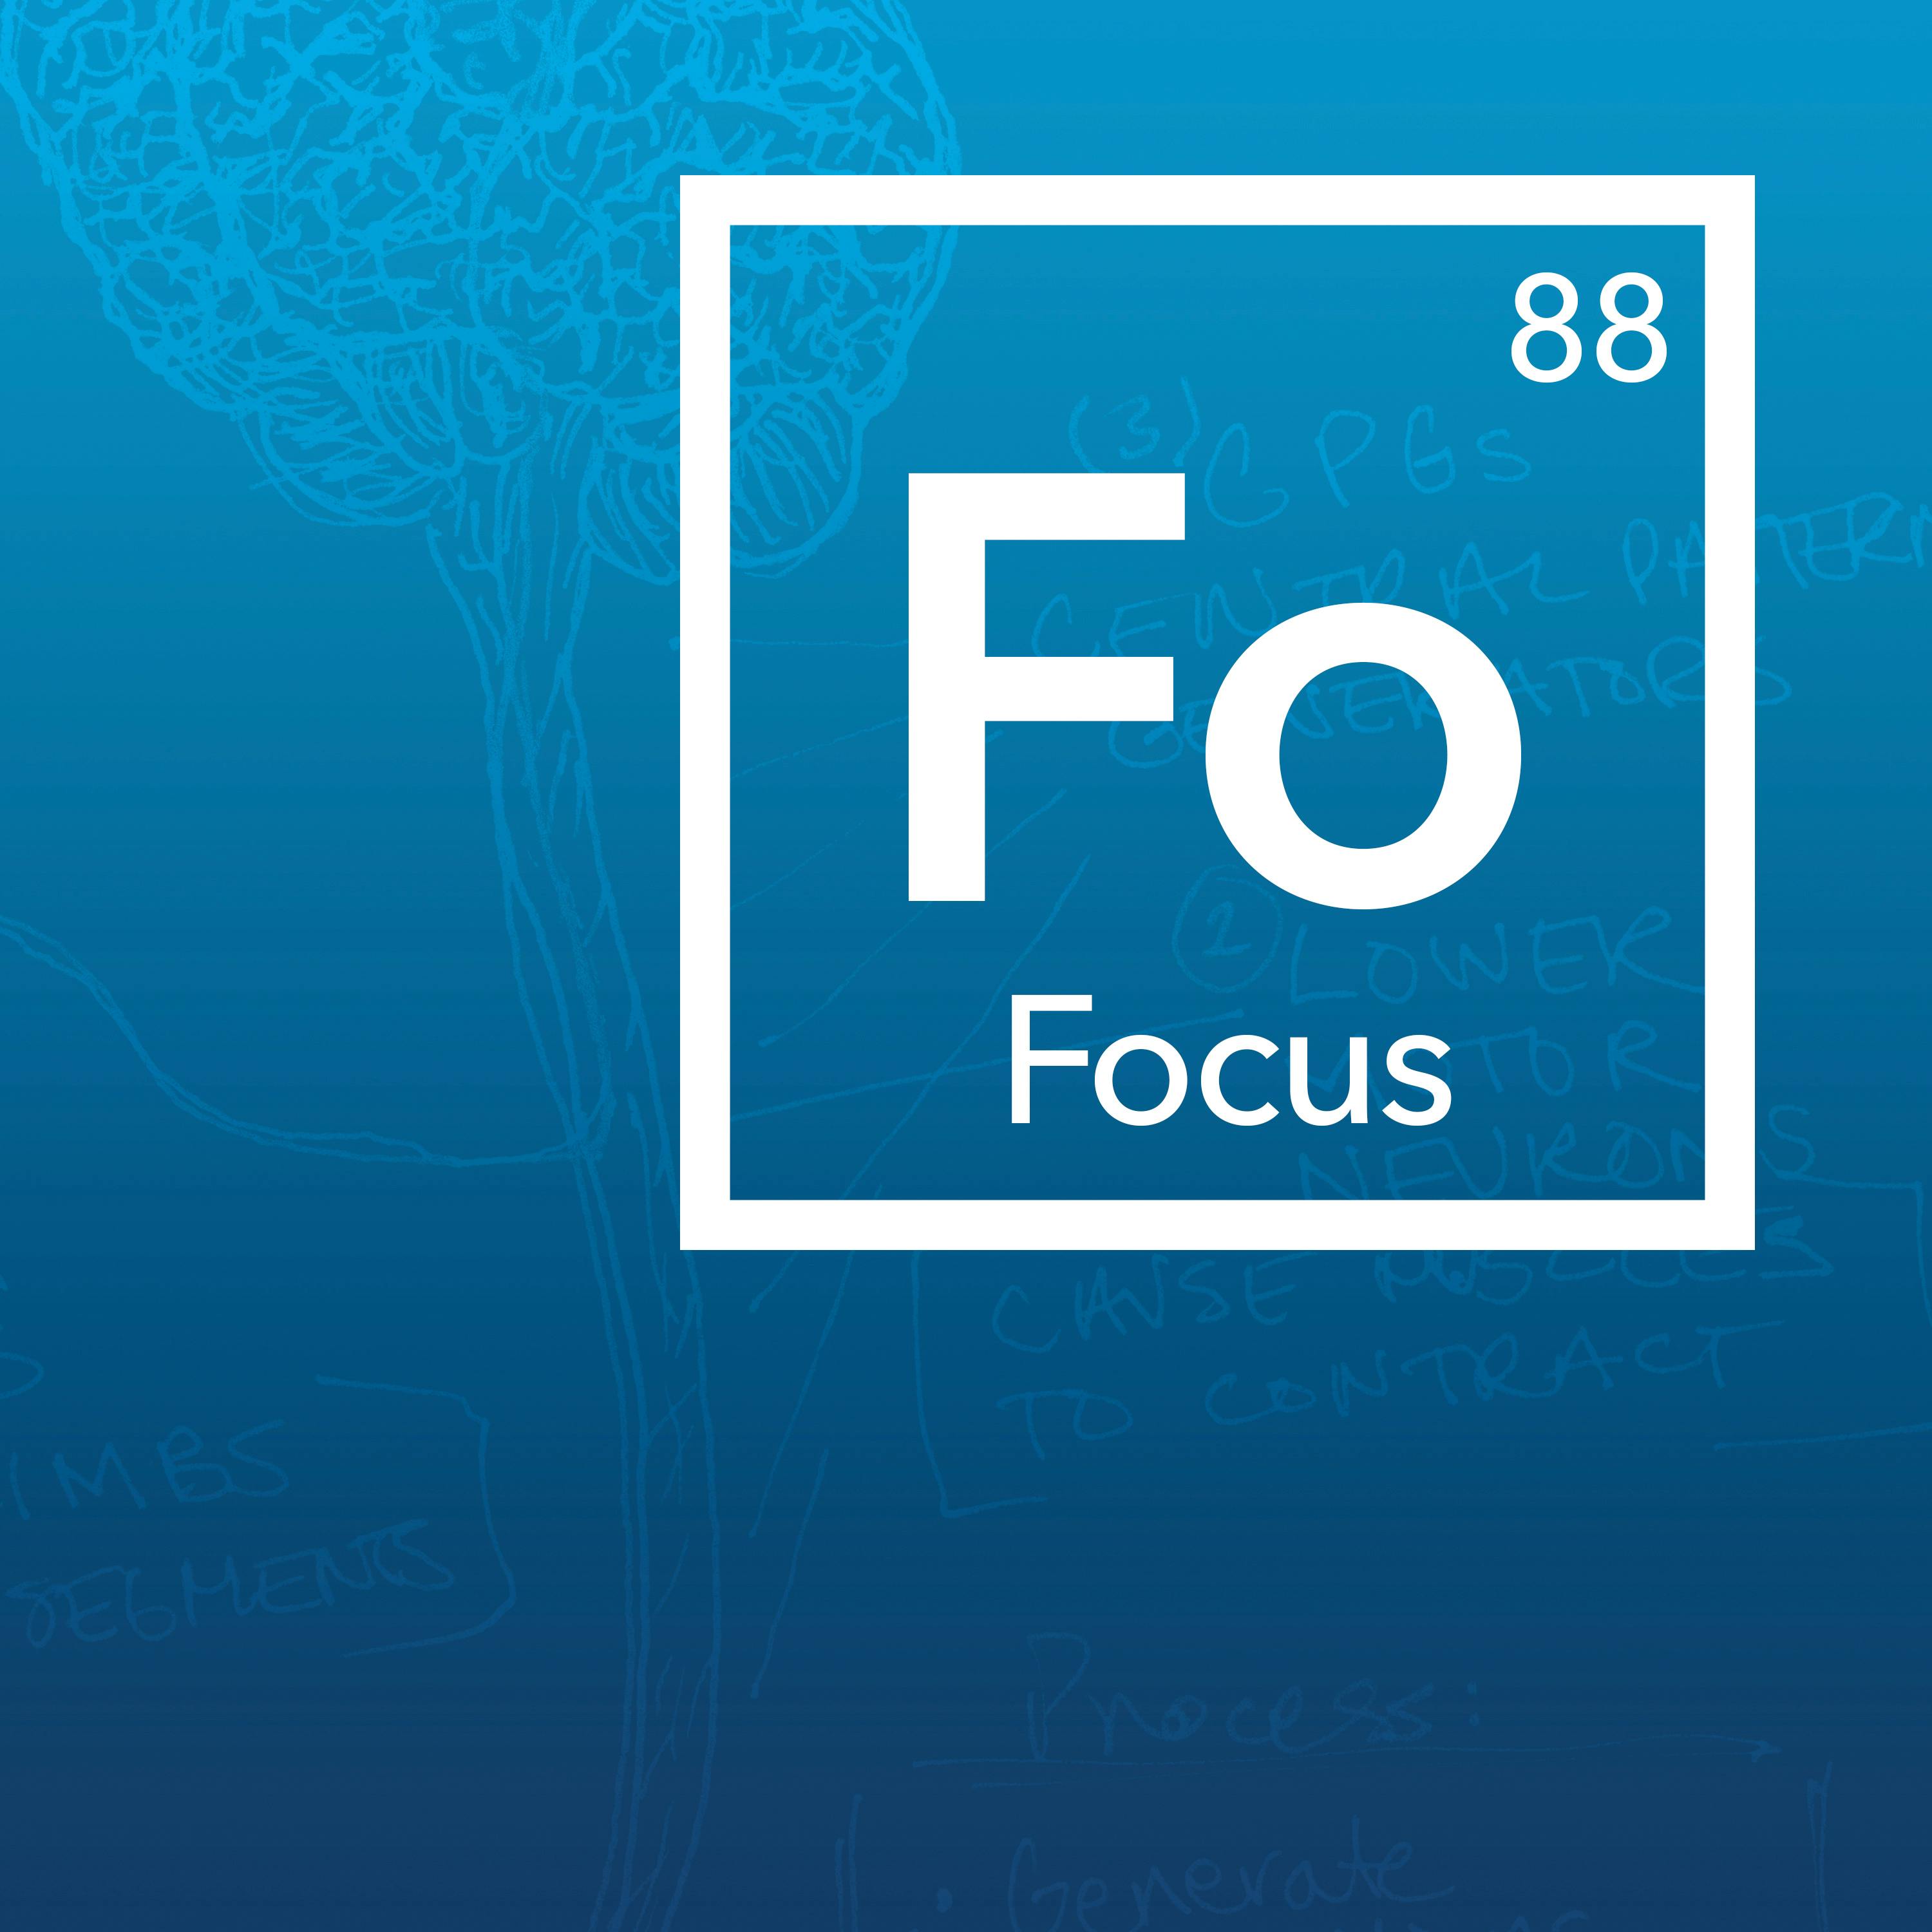 Tools to Improve Your Focus & Concentration